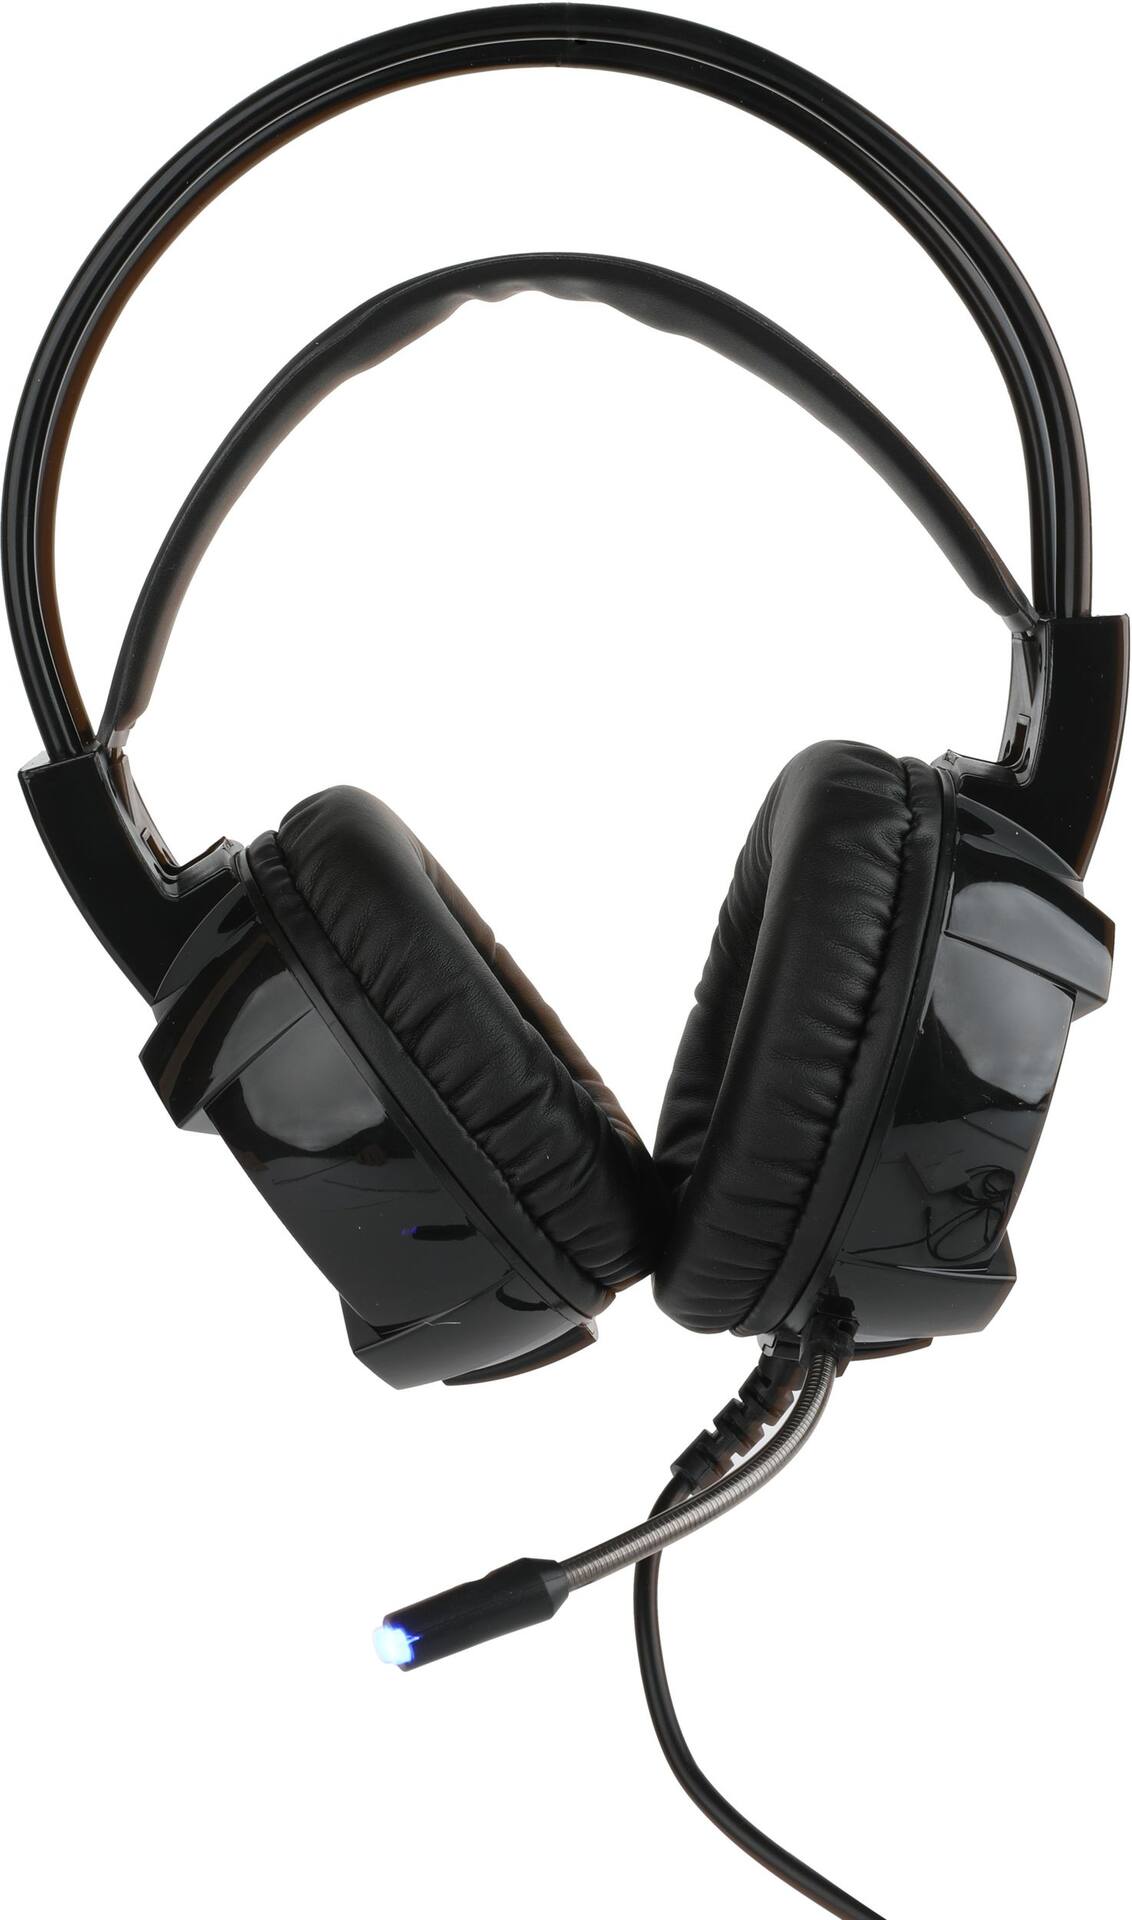 LVLUP LU732 Deluxe Light Up Gaming Headphones with Foldable Mic, Black